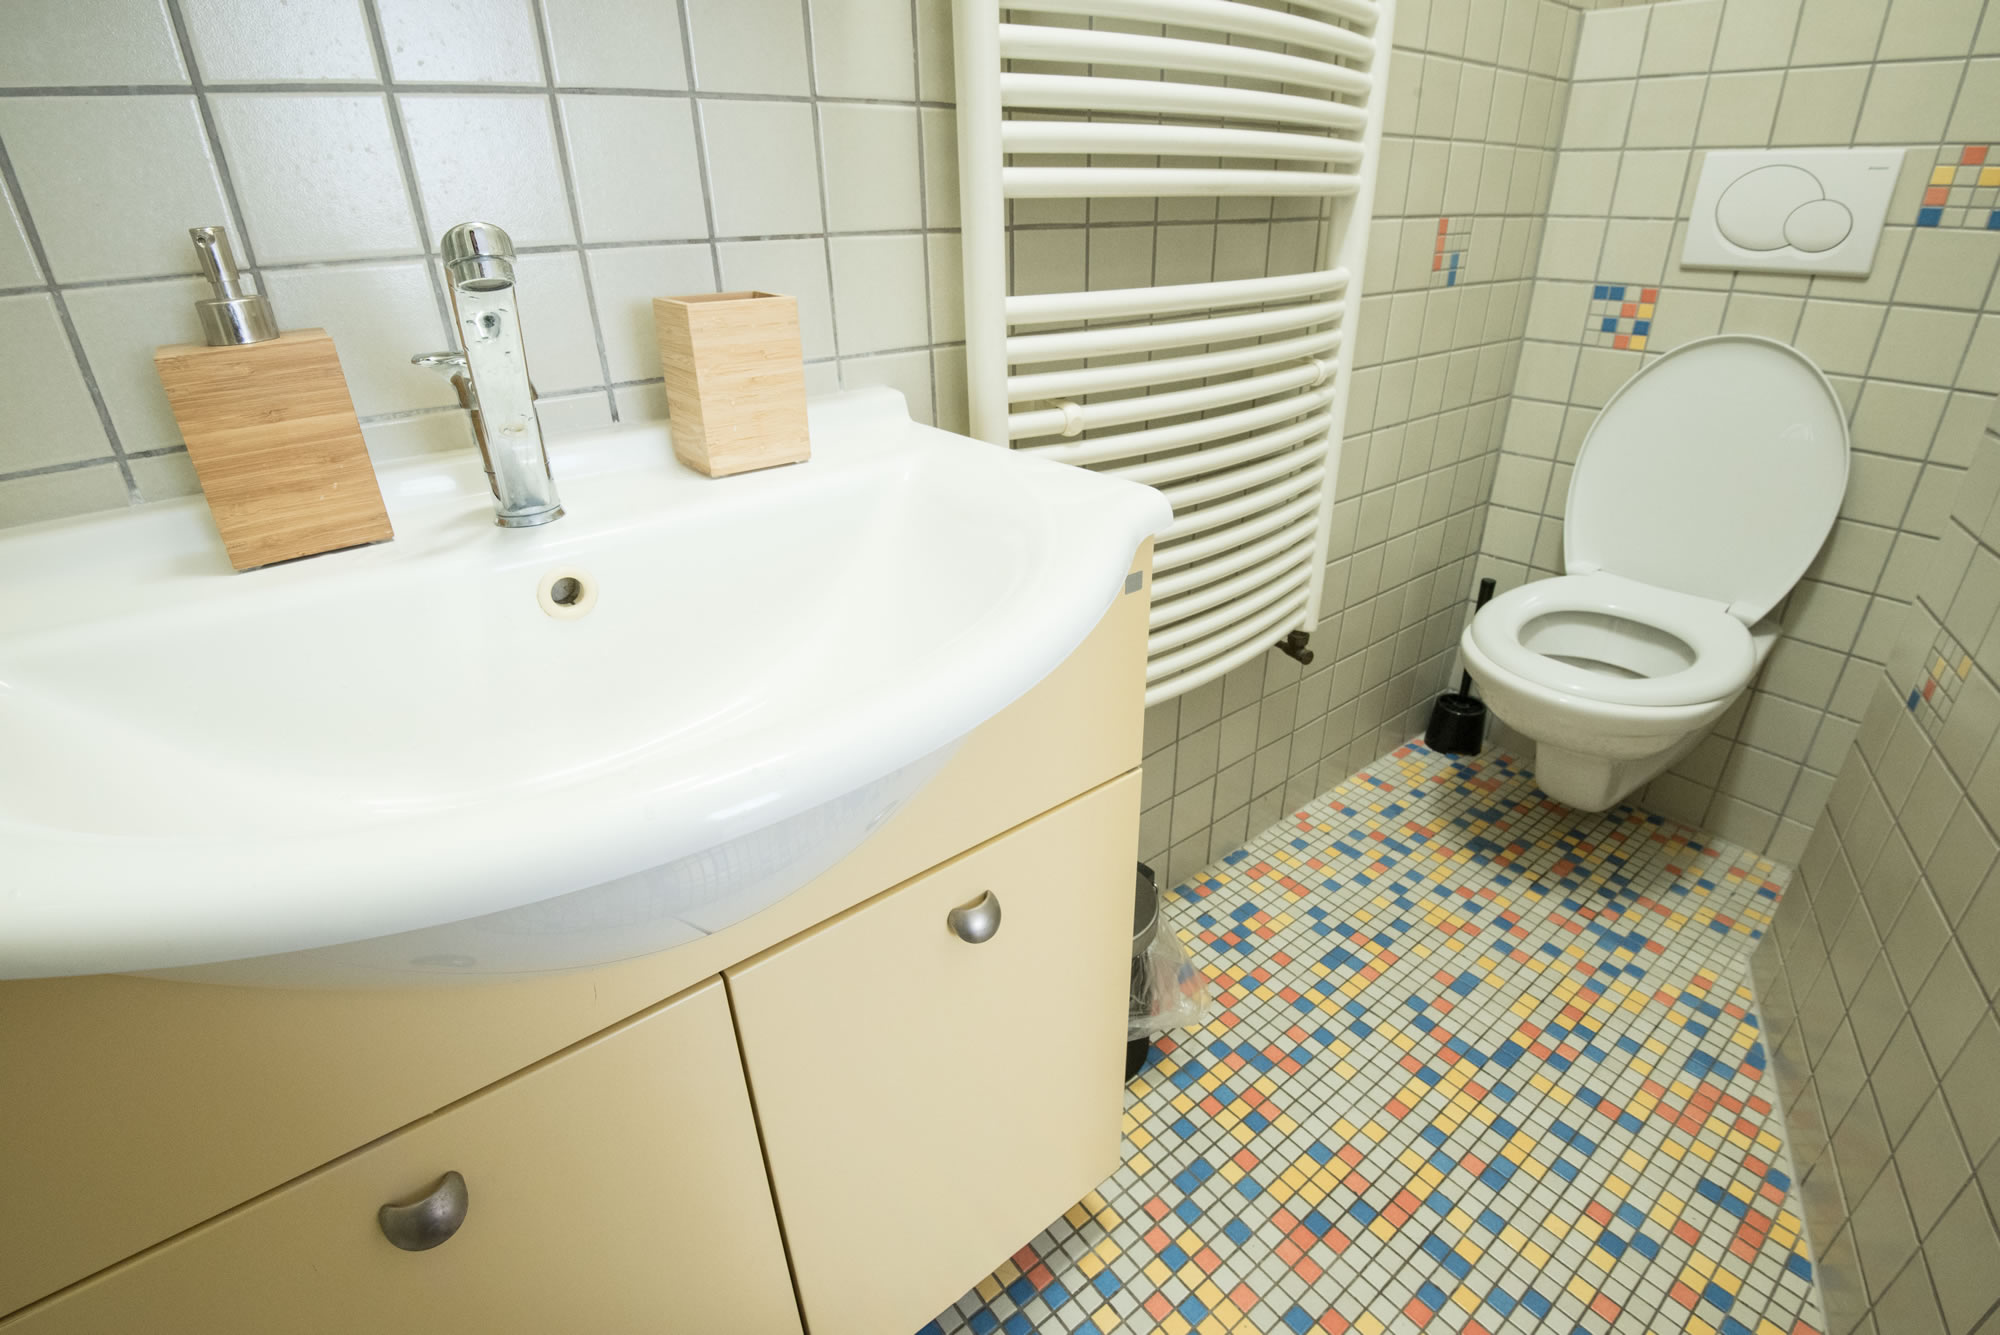 Bathroom with beige tiles on the wall and colored tiles on the floor. There is a toilet and a sink in the bathroom.